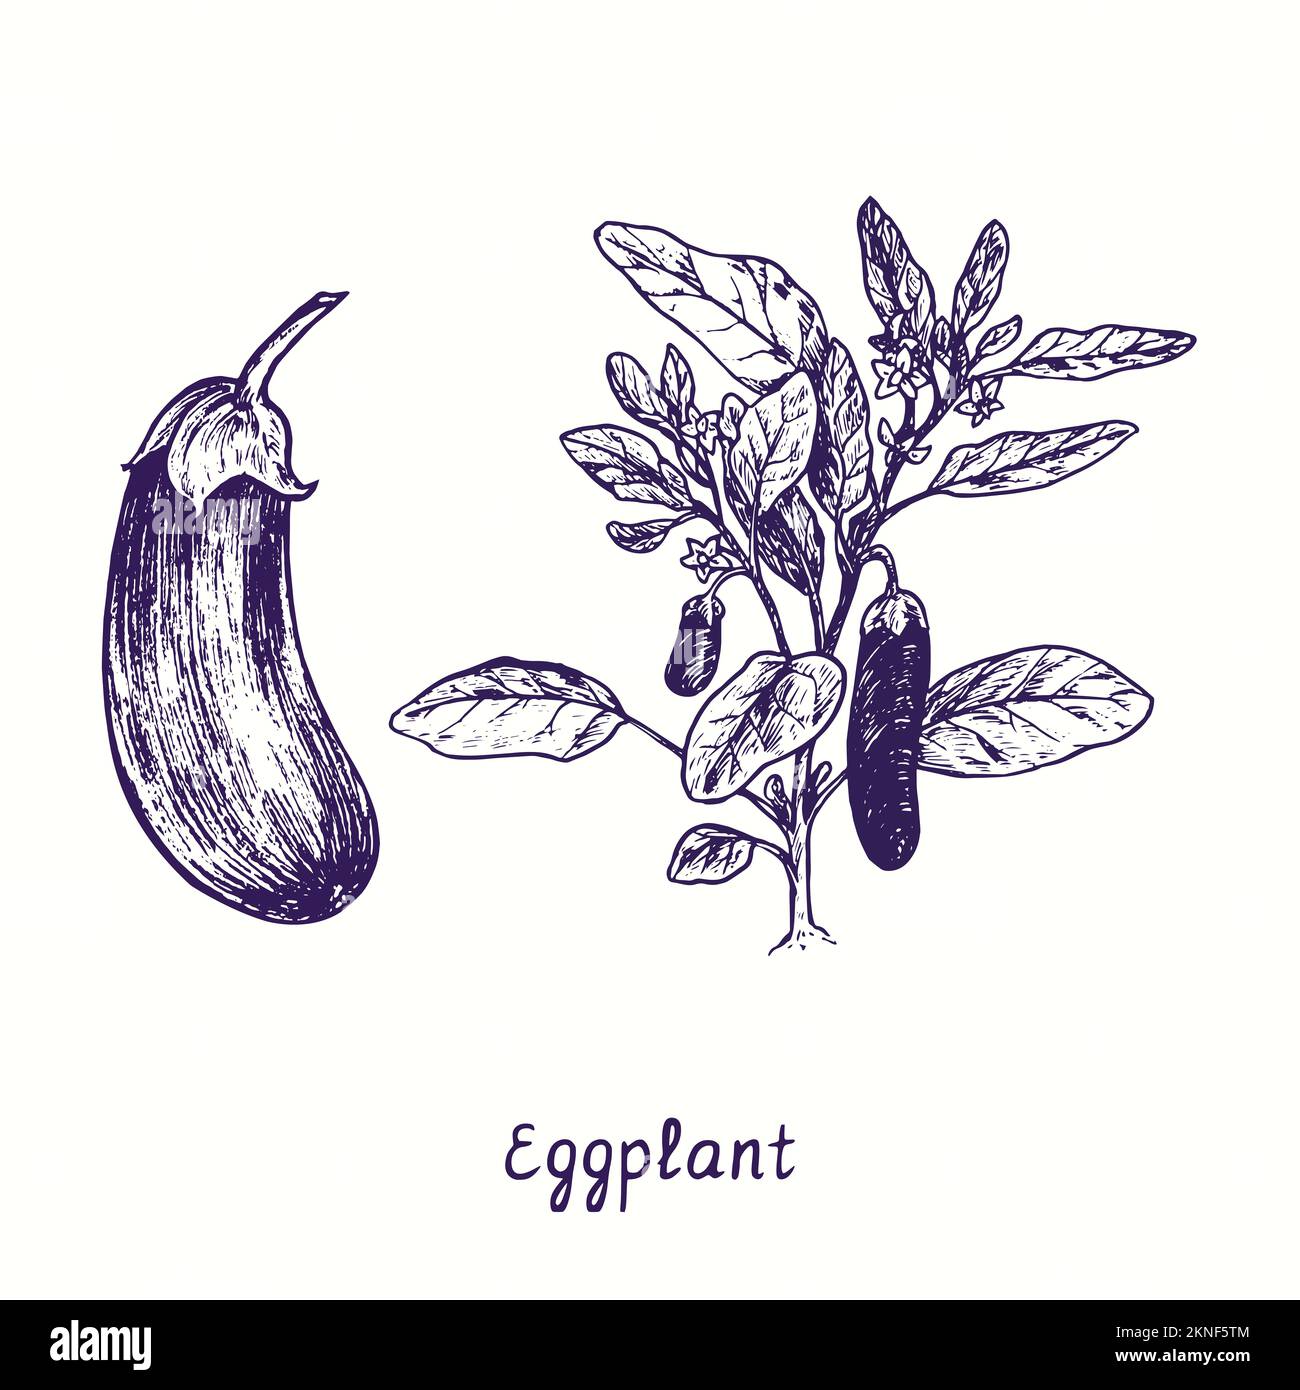 Eggplant  plant with flowers and leaves, whole vegetable. Ink black and white doodle drawing in woodcut style Stock Photo